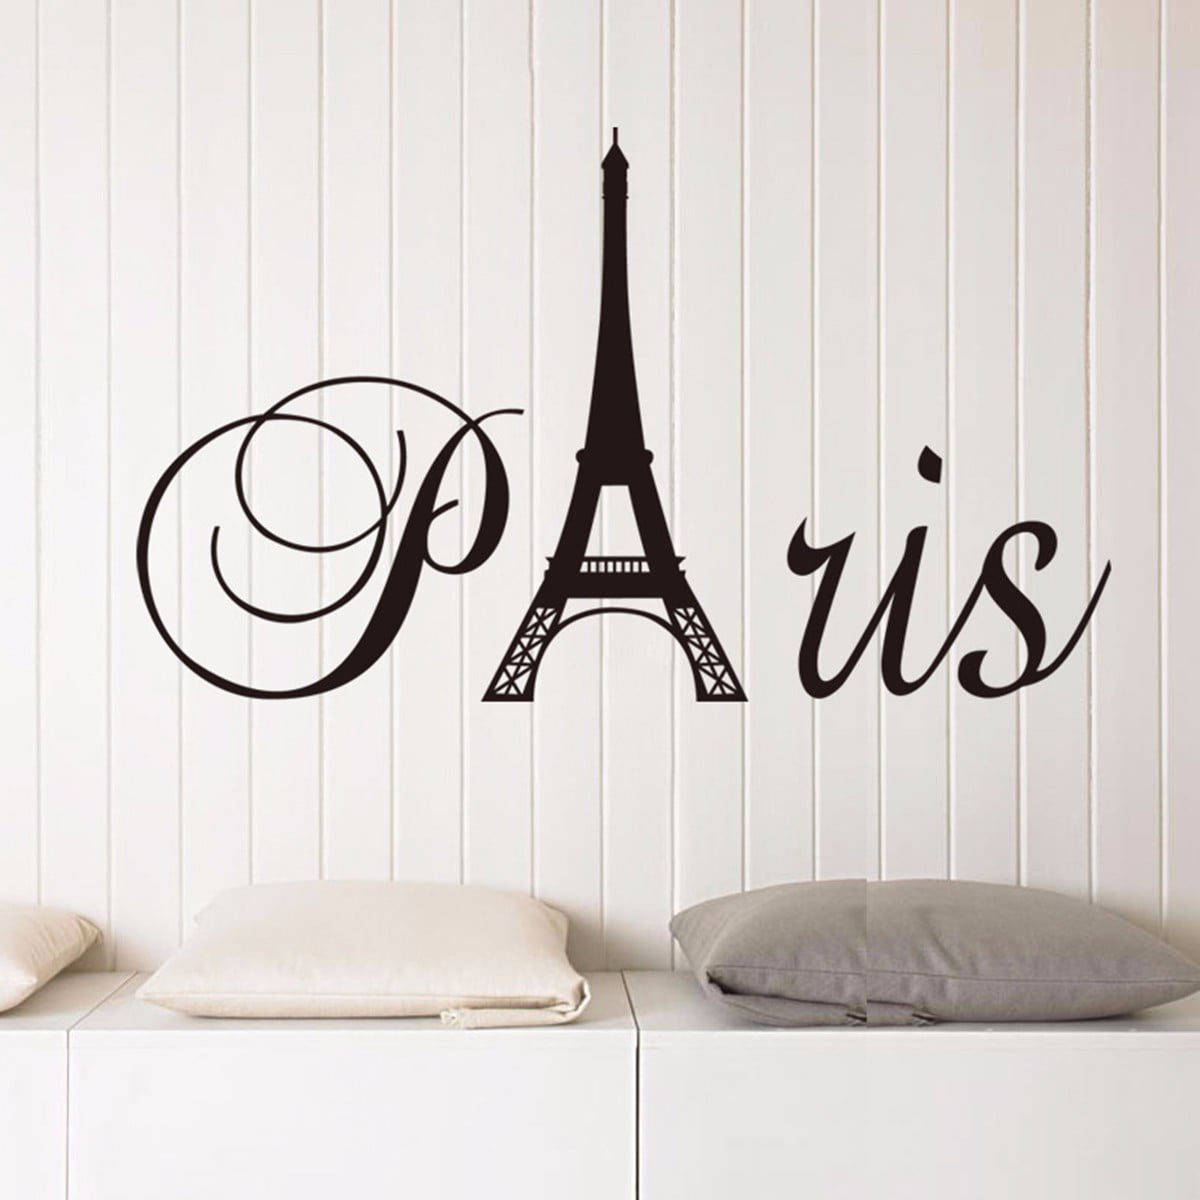 Details about  / EIFFEL TOWER PREPASTED WALLPAPER MURAL Paris Wall Decor 10.5/' x 6/' NEW